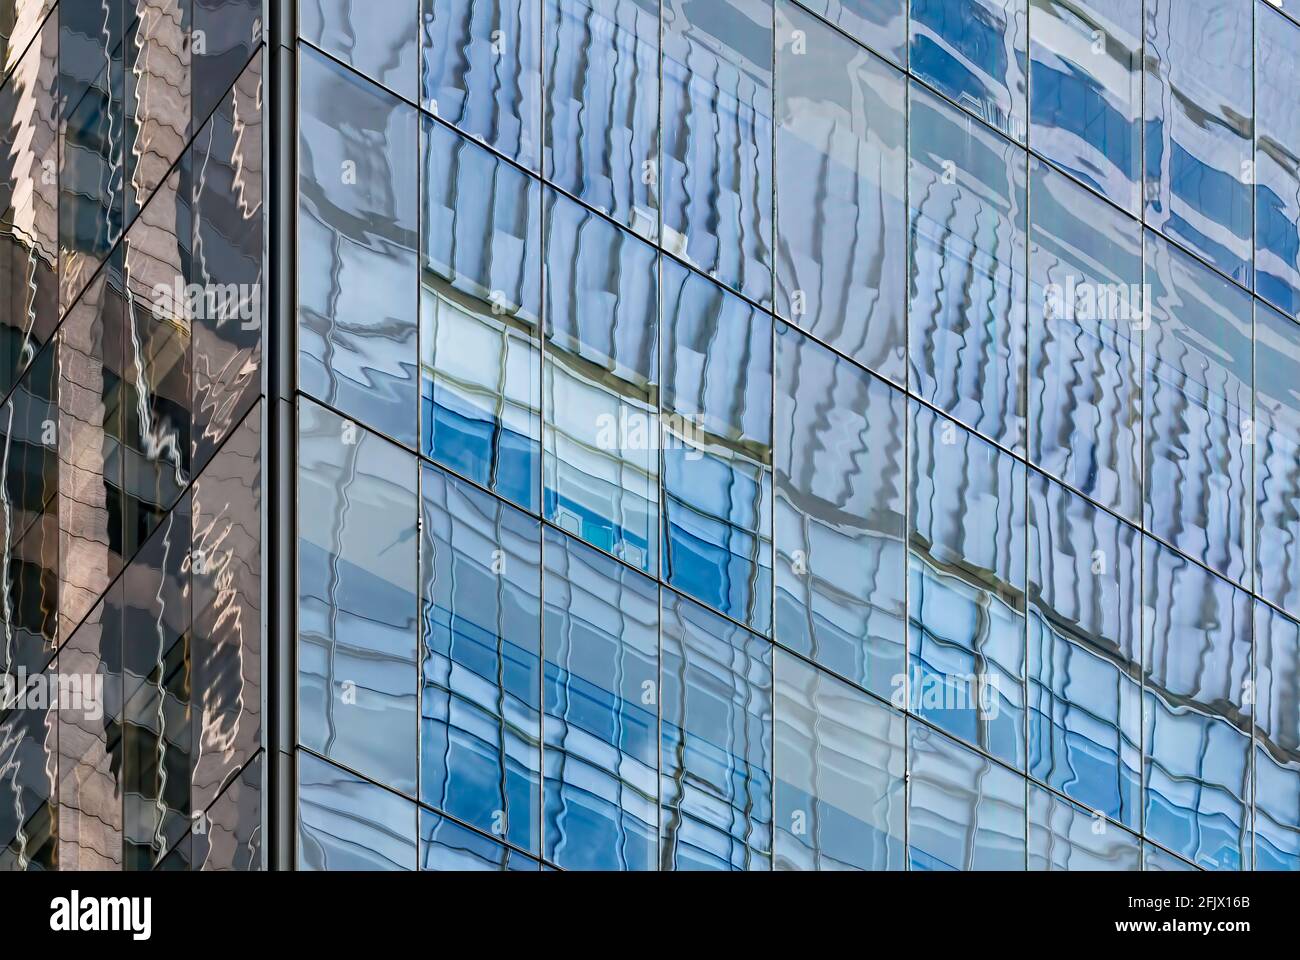 Reflective glass and steel grids in New York City office skyscrapers. Stock Photo